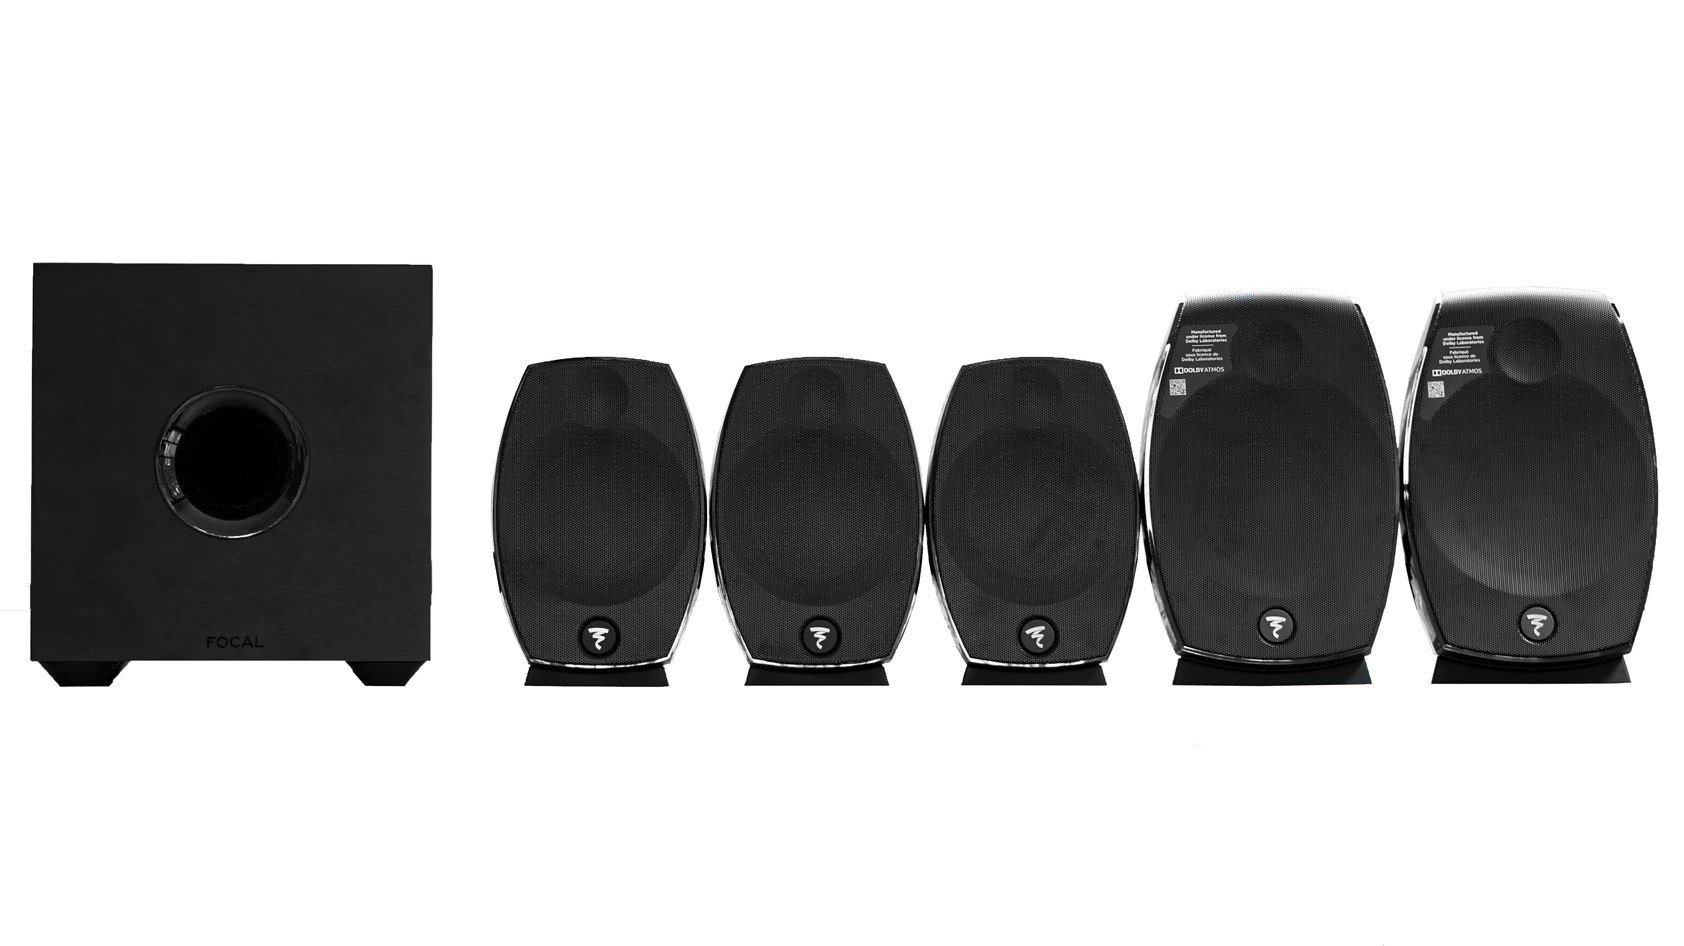 Focal Sib Evo Dolby Atmos 5.1.2 Speaker System Review | Home Theater Forum